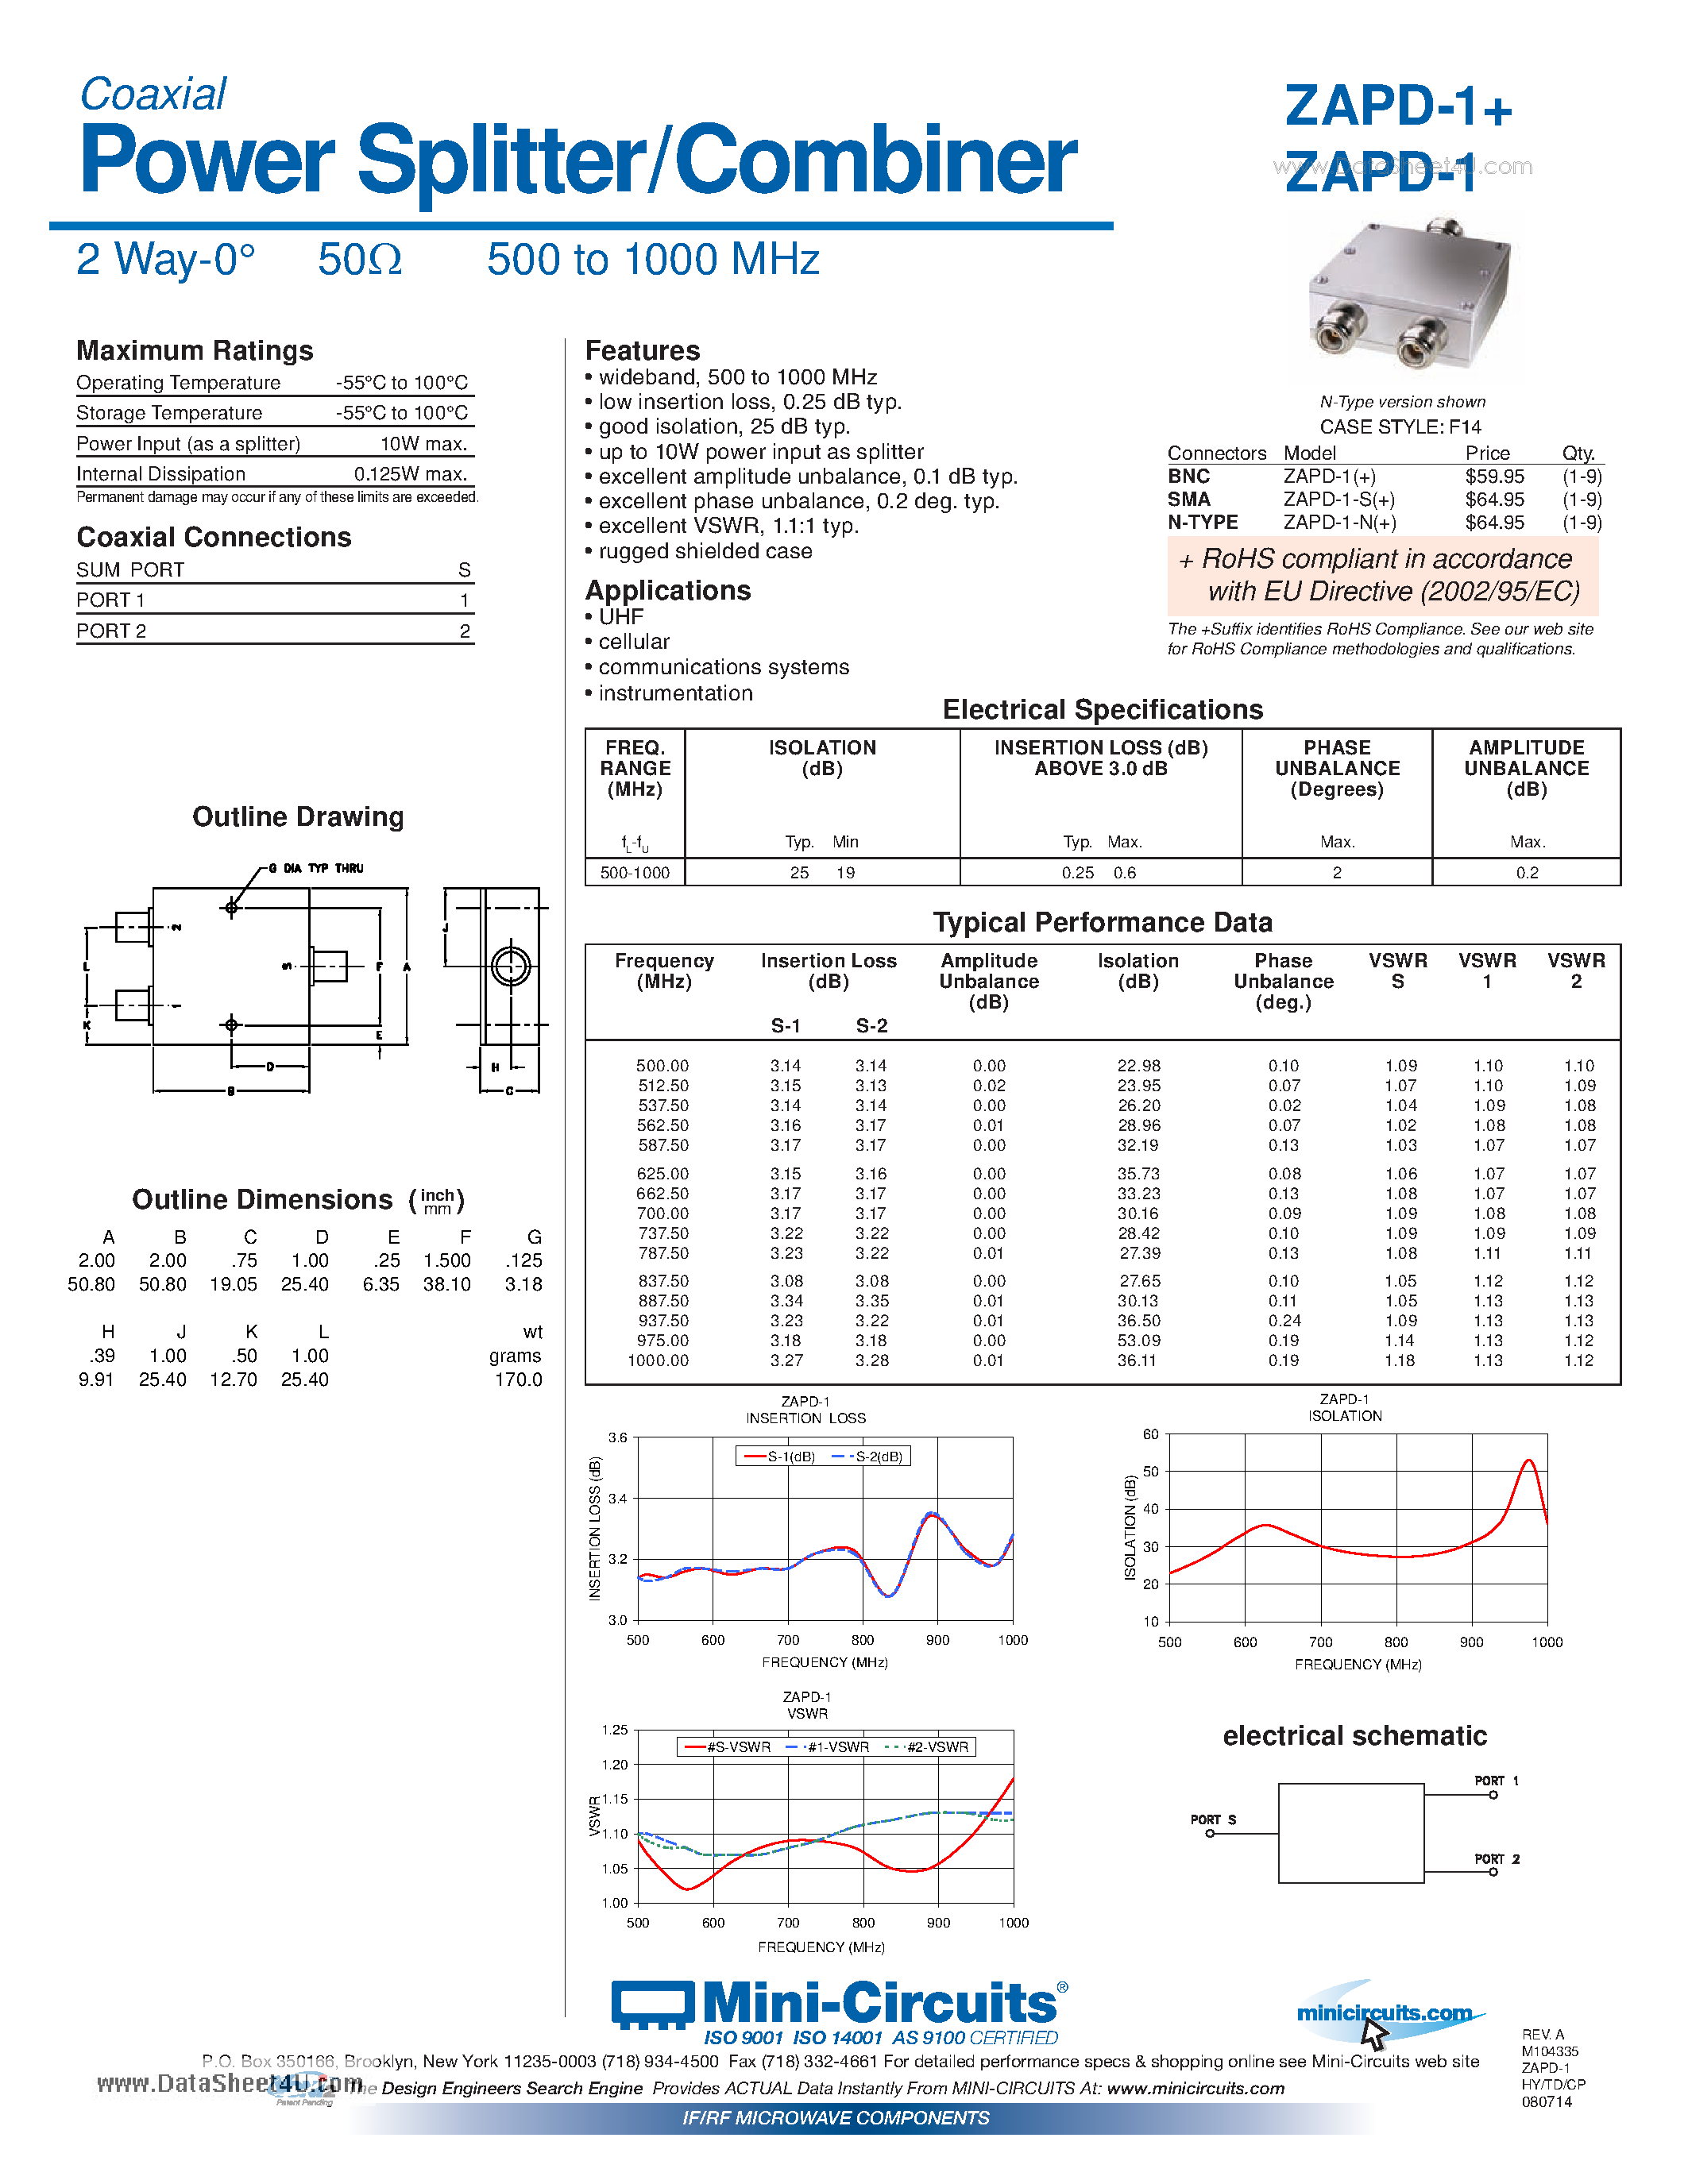 Datasheet ZAPD-1 - Power Splitter/Combiner 2 Way-0 50ohm 500 to 1000 MHz page 1